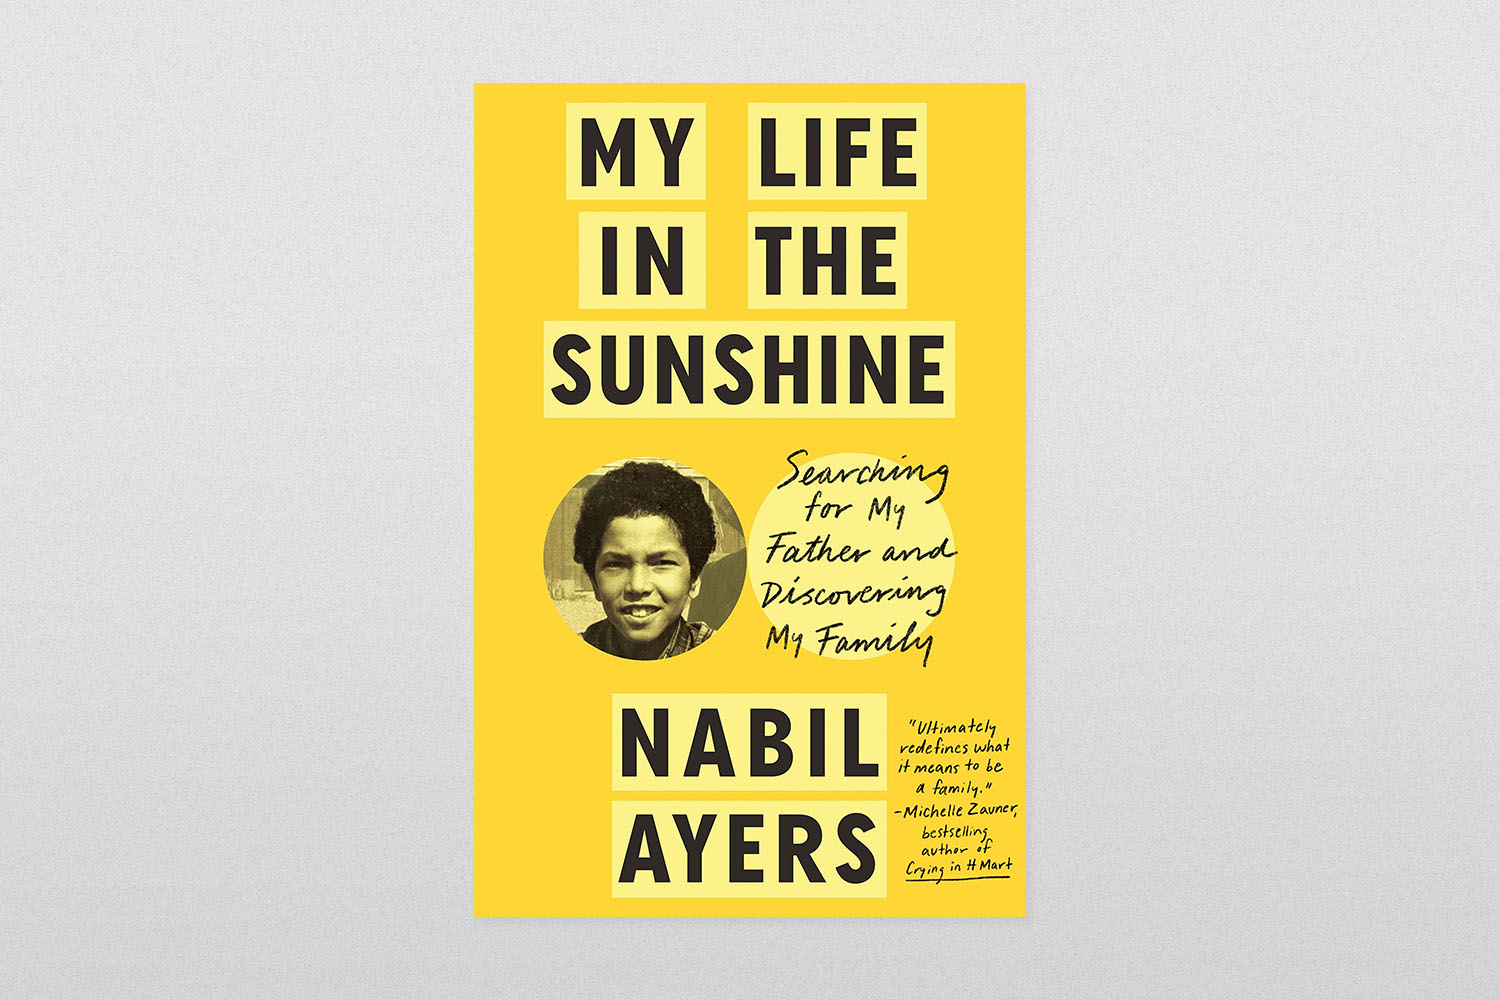 My Life in the Sunshine- Searching for My Father and Discovering My Family by Nabil Ayers